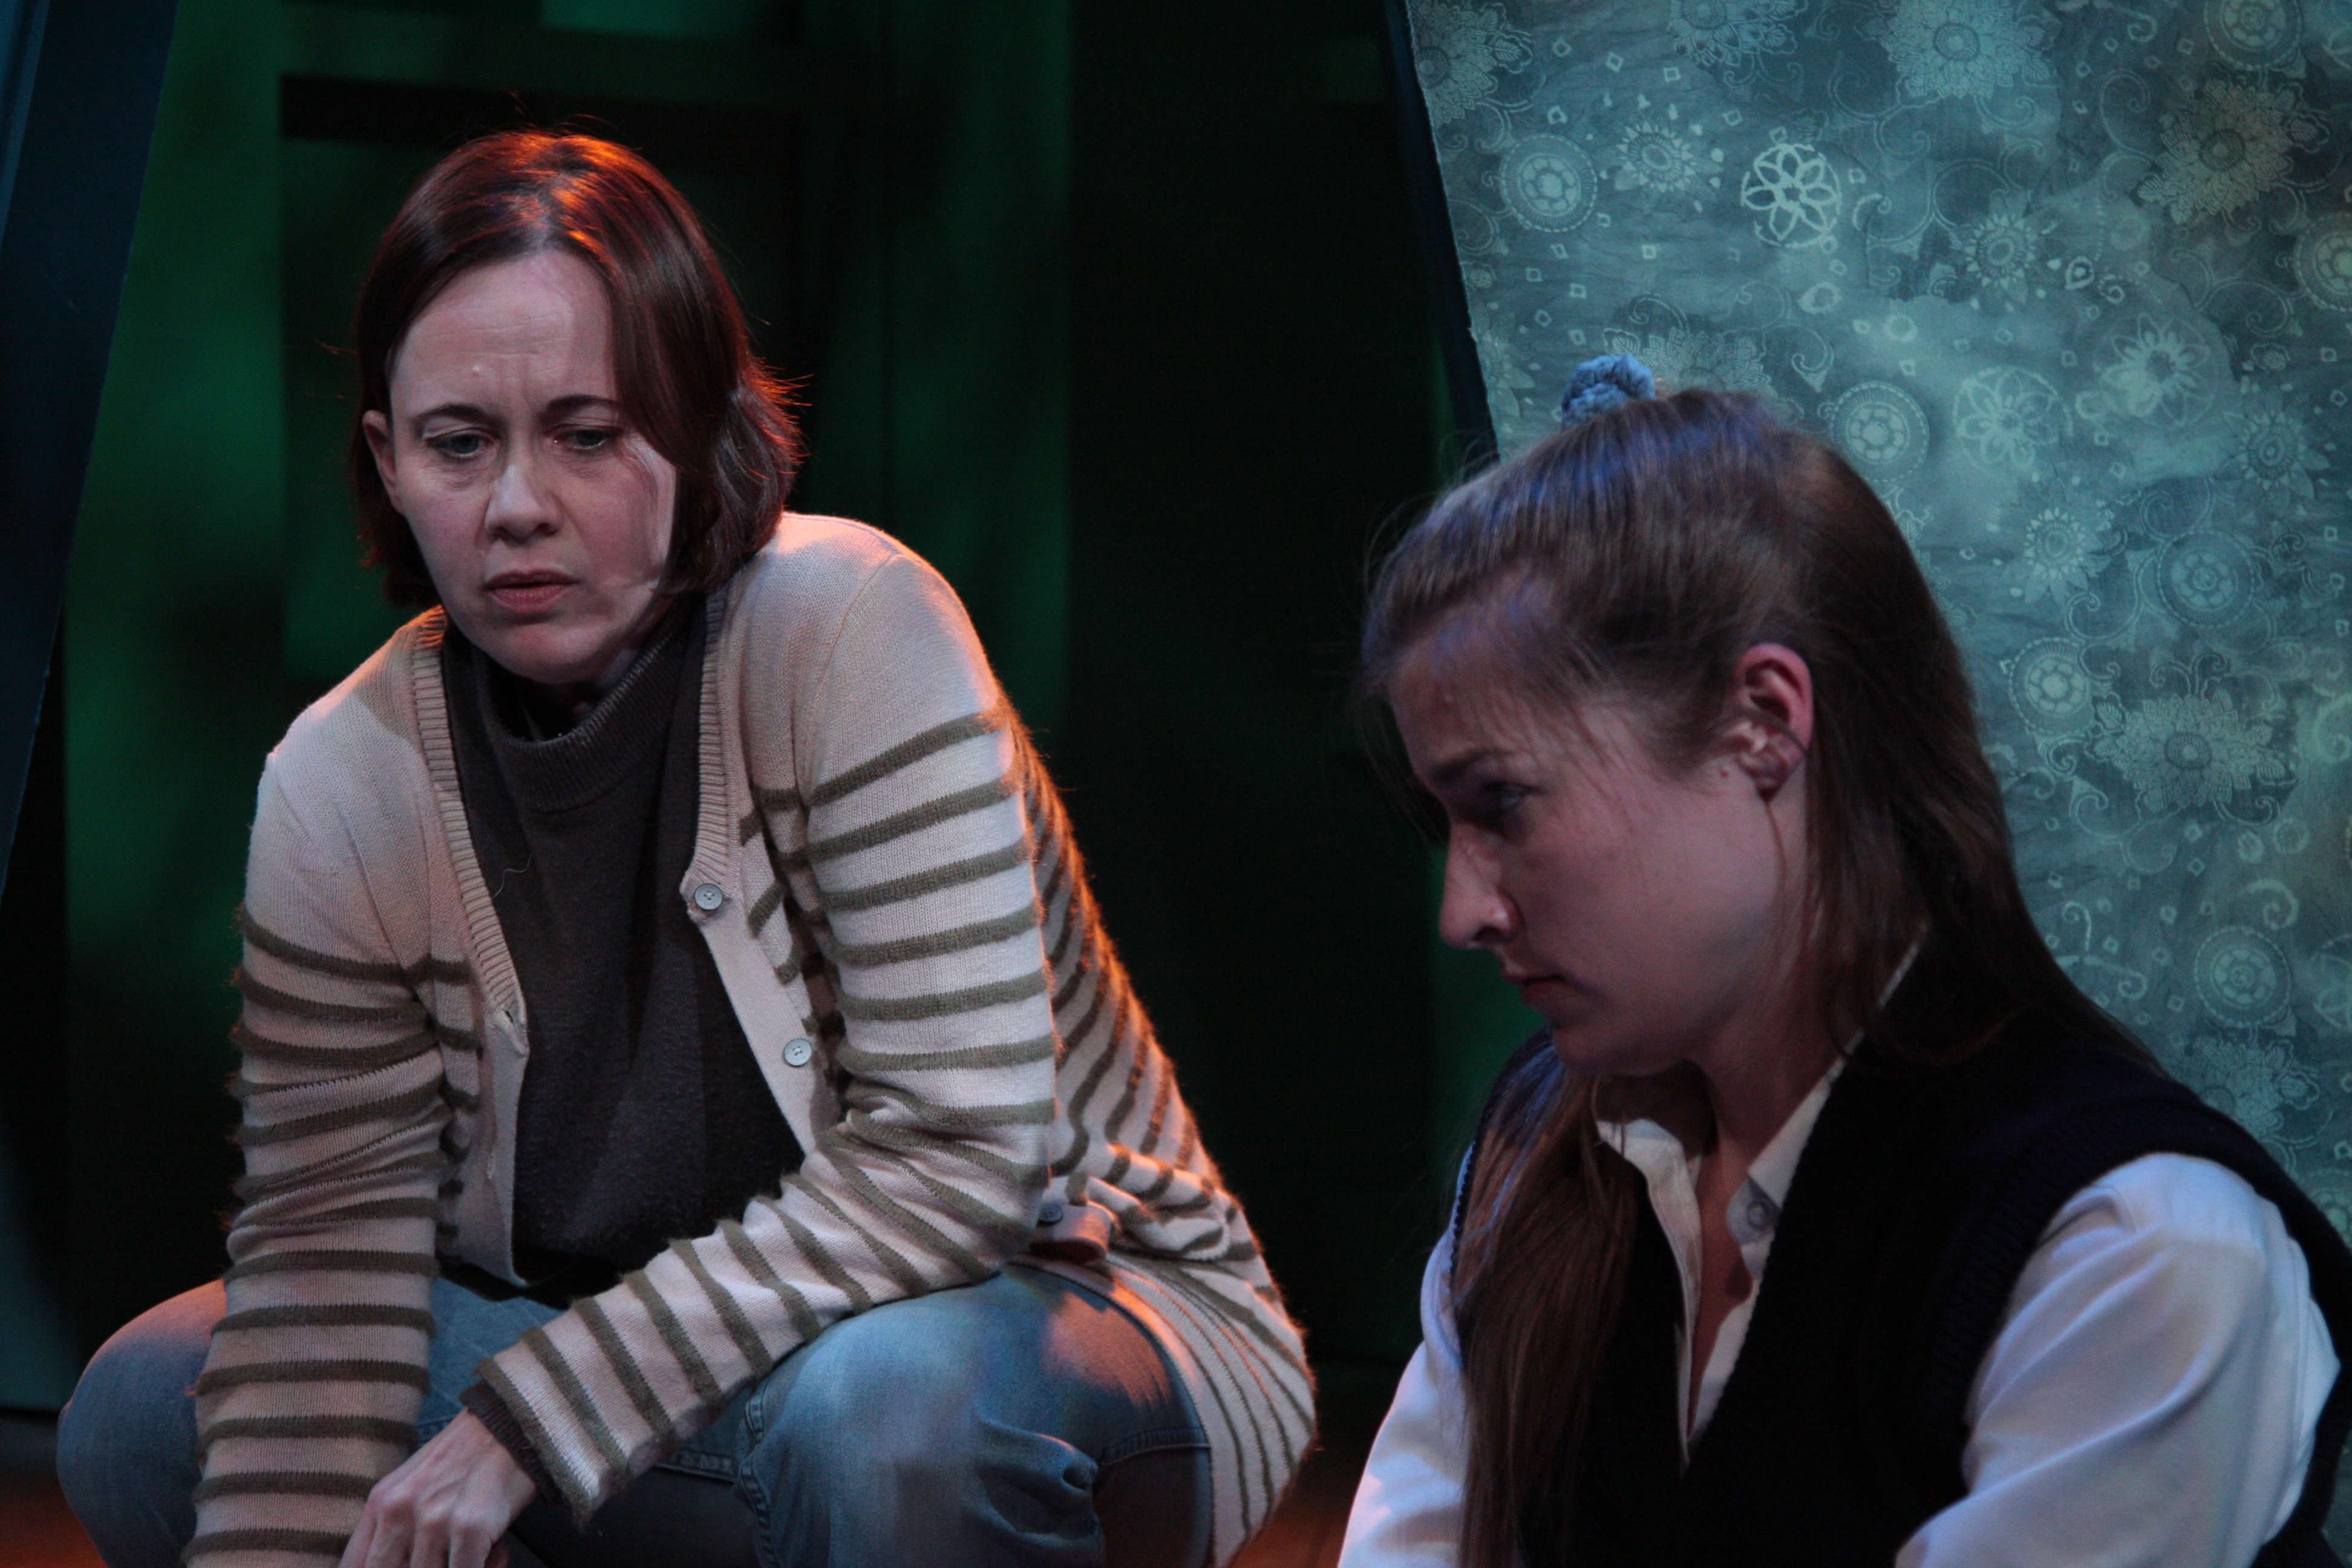 'Top Girls' by Caryl Churchill at The Antaeus Company. Karianne Flaathen and Julia Davis